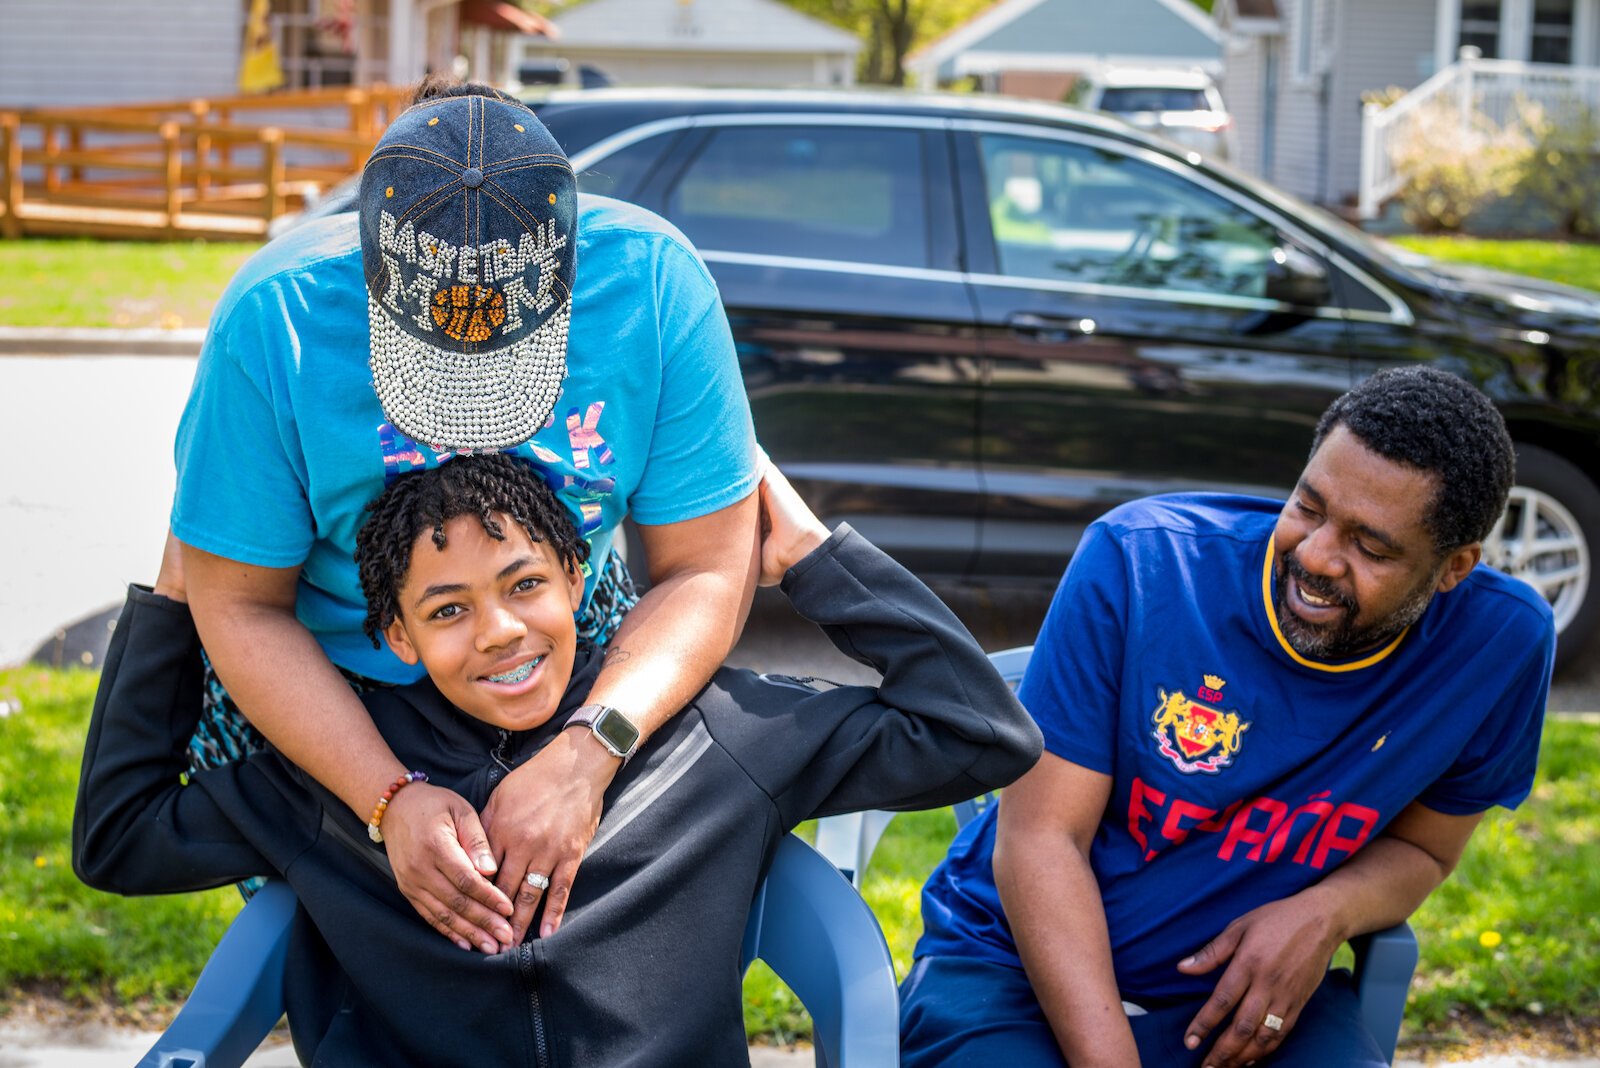 The Hemphill family, Ebony, Dontray, and DJ (seated), were inspired to advocate for juveline justice reform when their son, then 9, was wrongly accused of starting a fight.